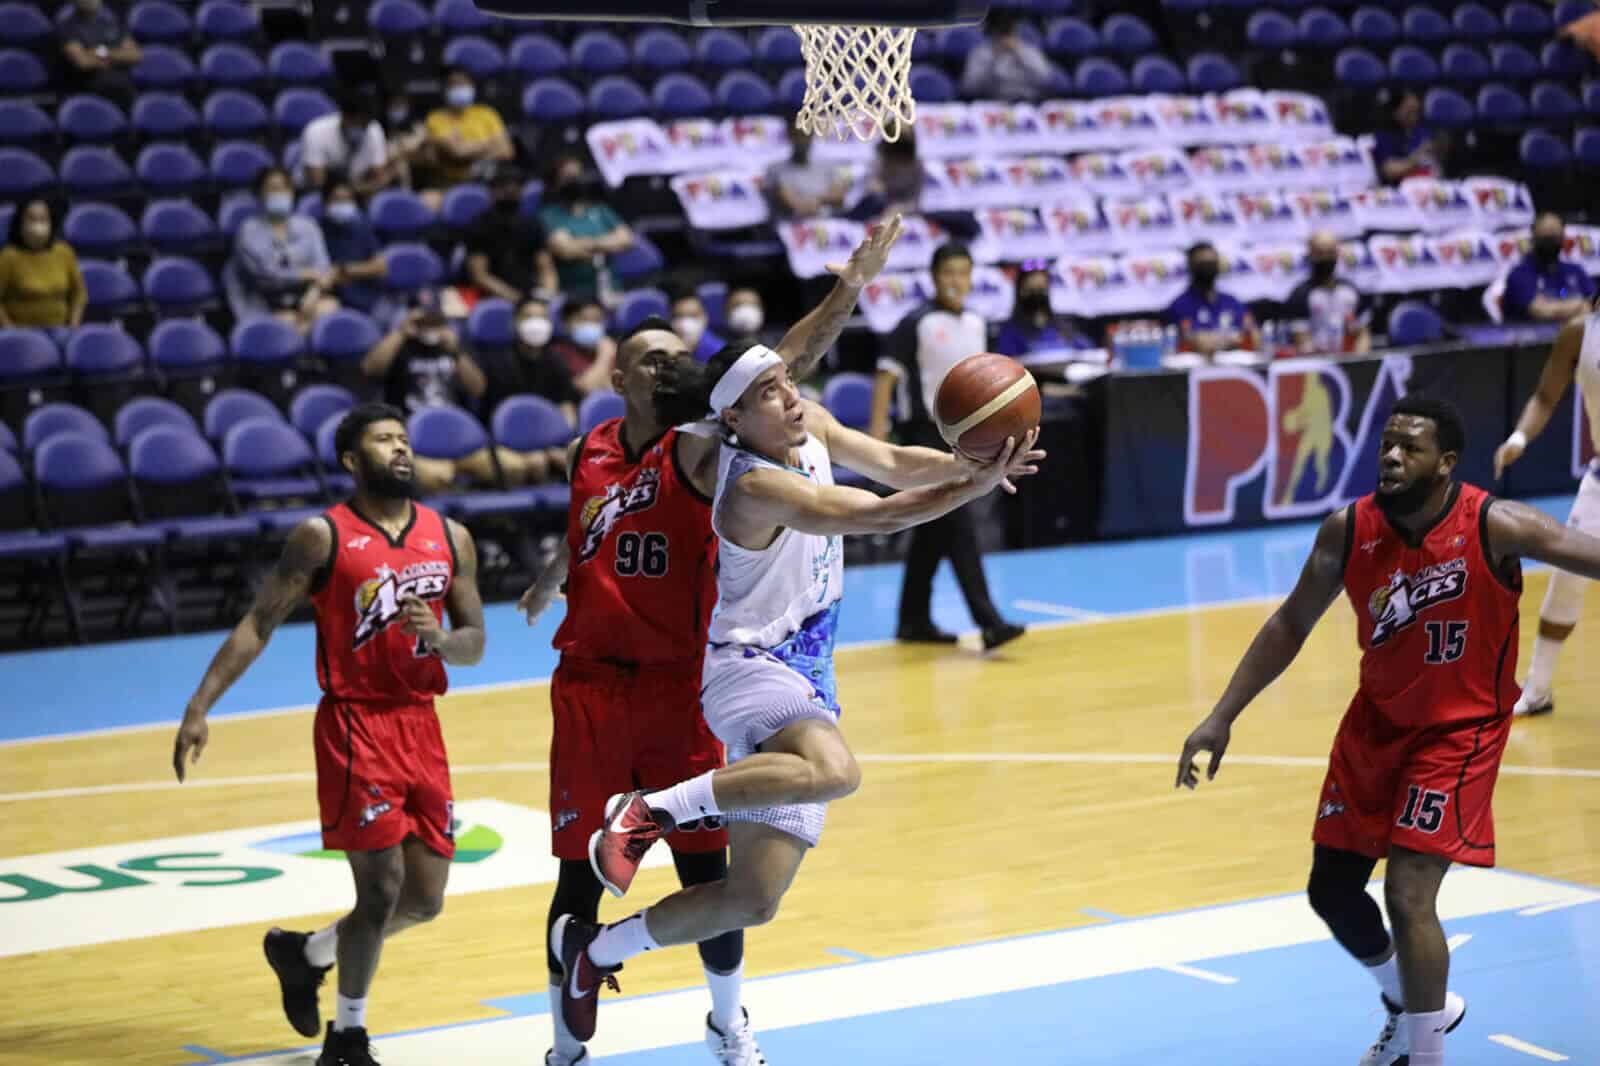 A basketball player is trying to block a shot in the PBA Governors’ Cup.